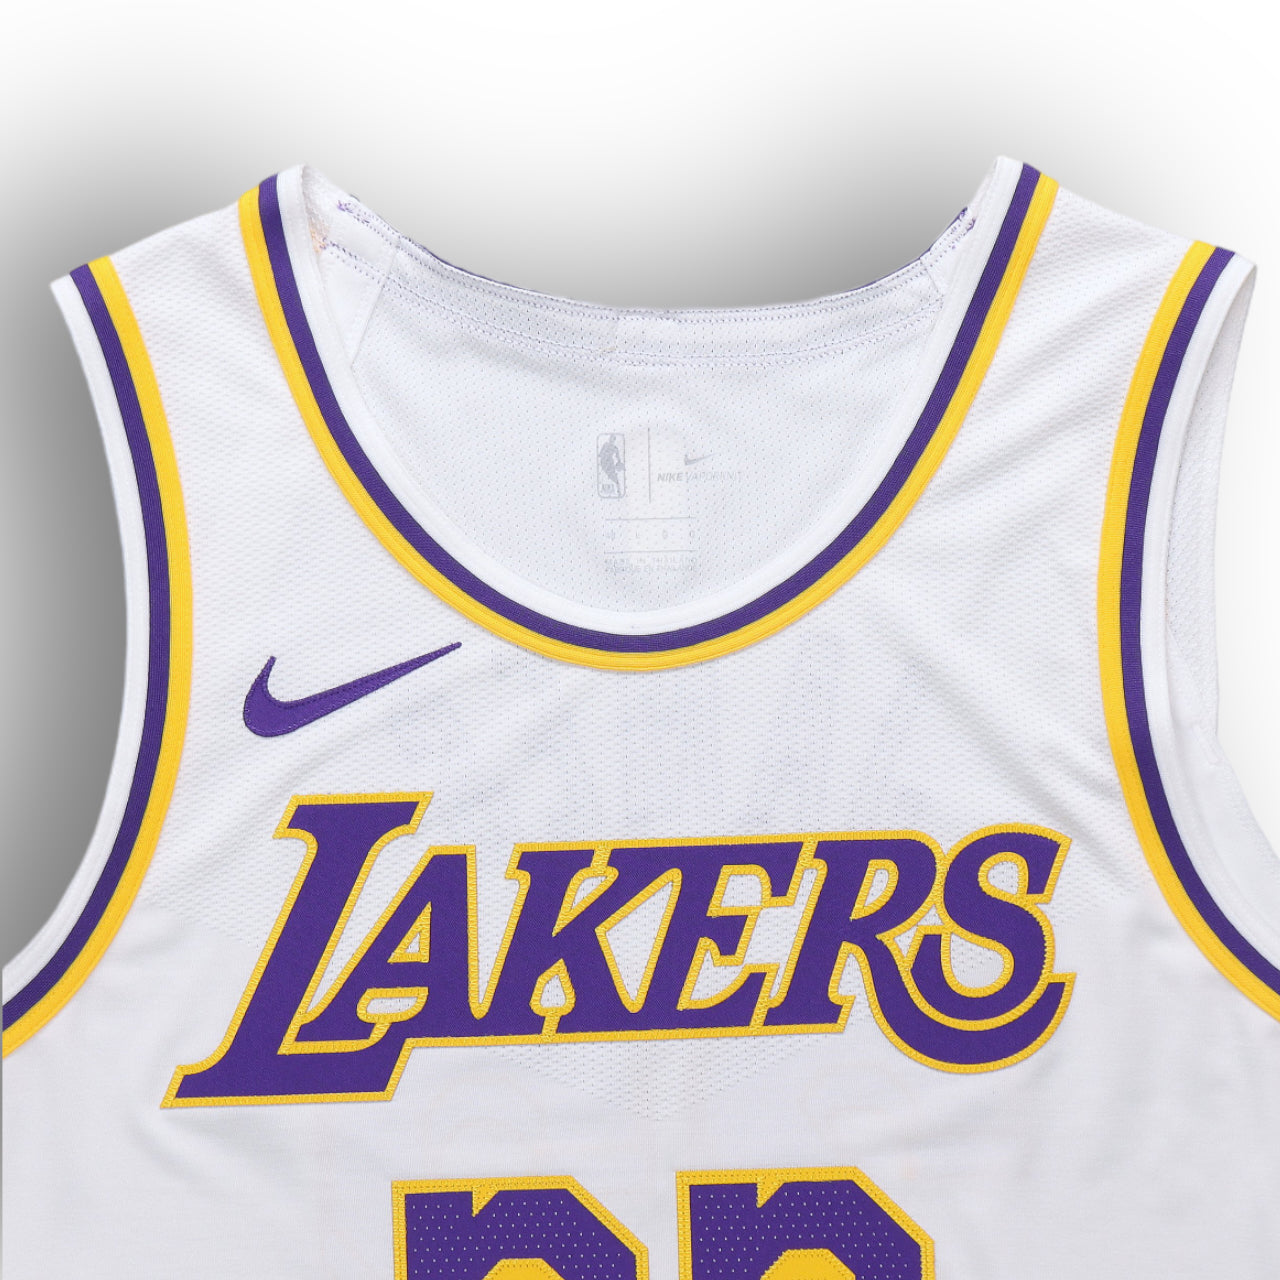 LeBron James Los Angeles Lakers Association Edition Nike Authentic Jersey - White #23 - Hoop Jersey Store